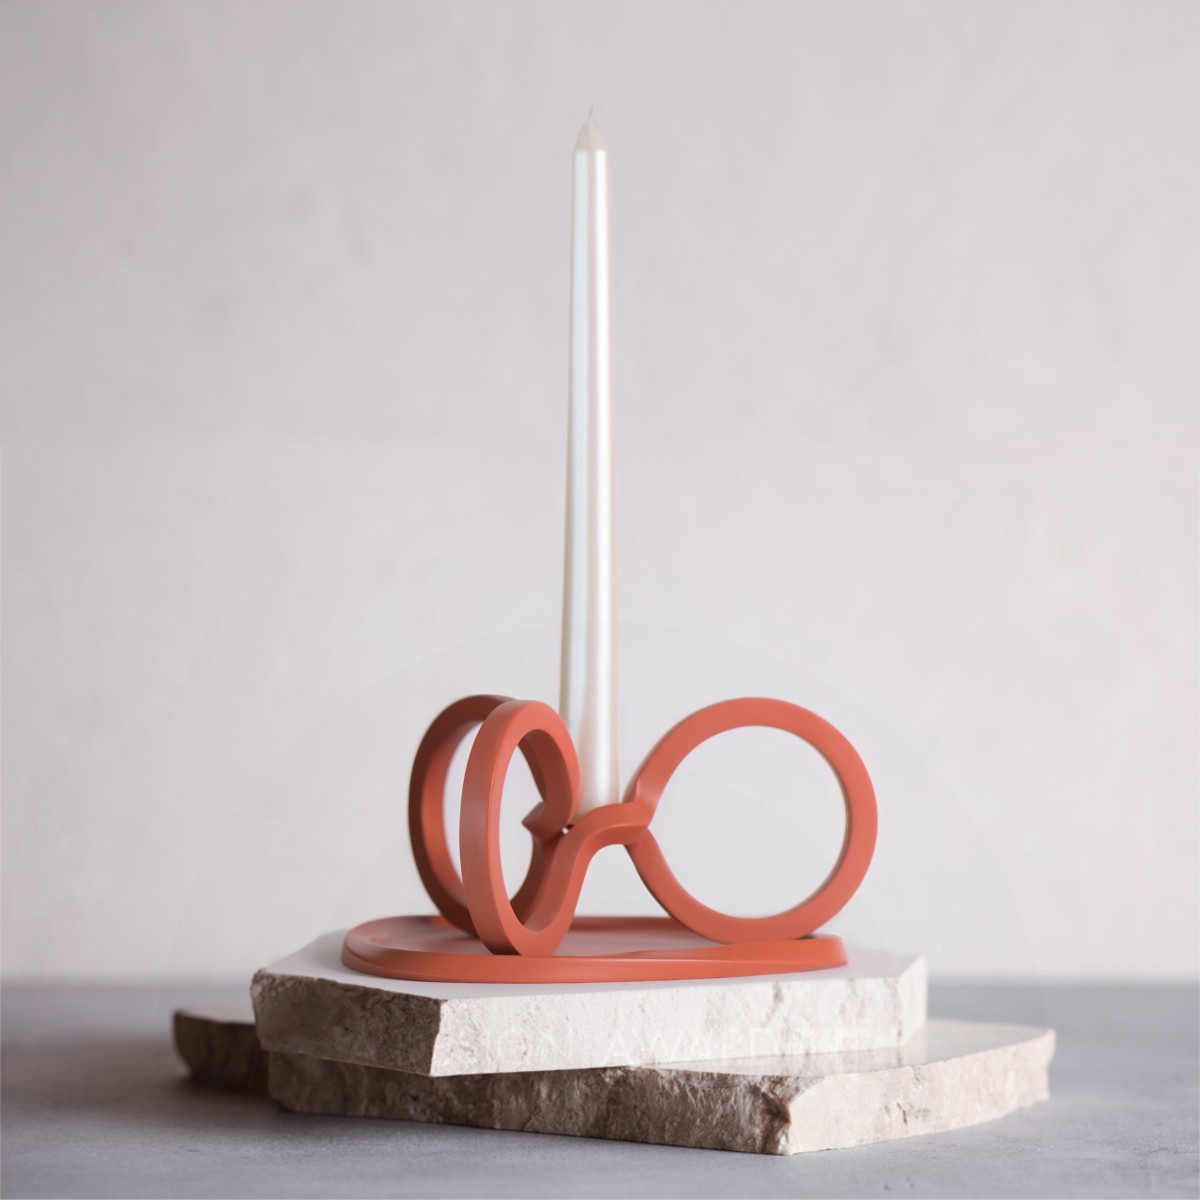 Kazoo Design wins Iron at the prestigious A' Decorative Items and Homeware Design Award with Loop Candleholder.